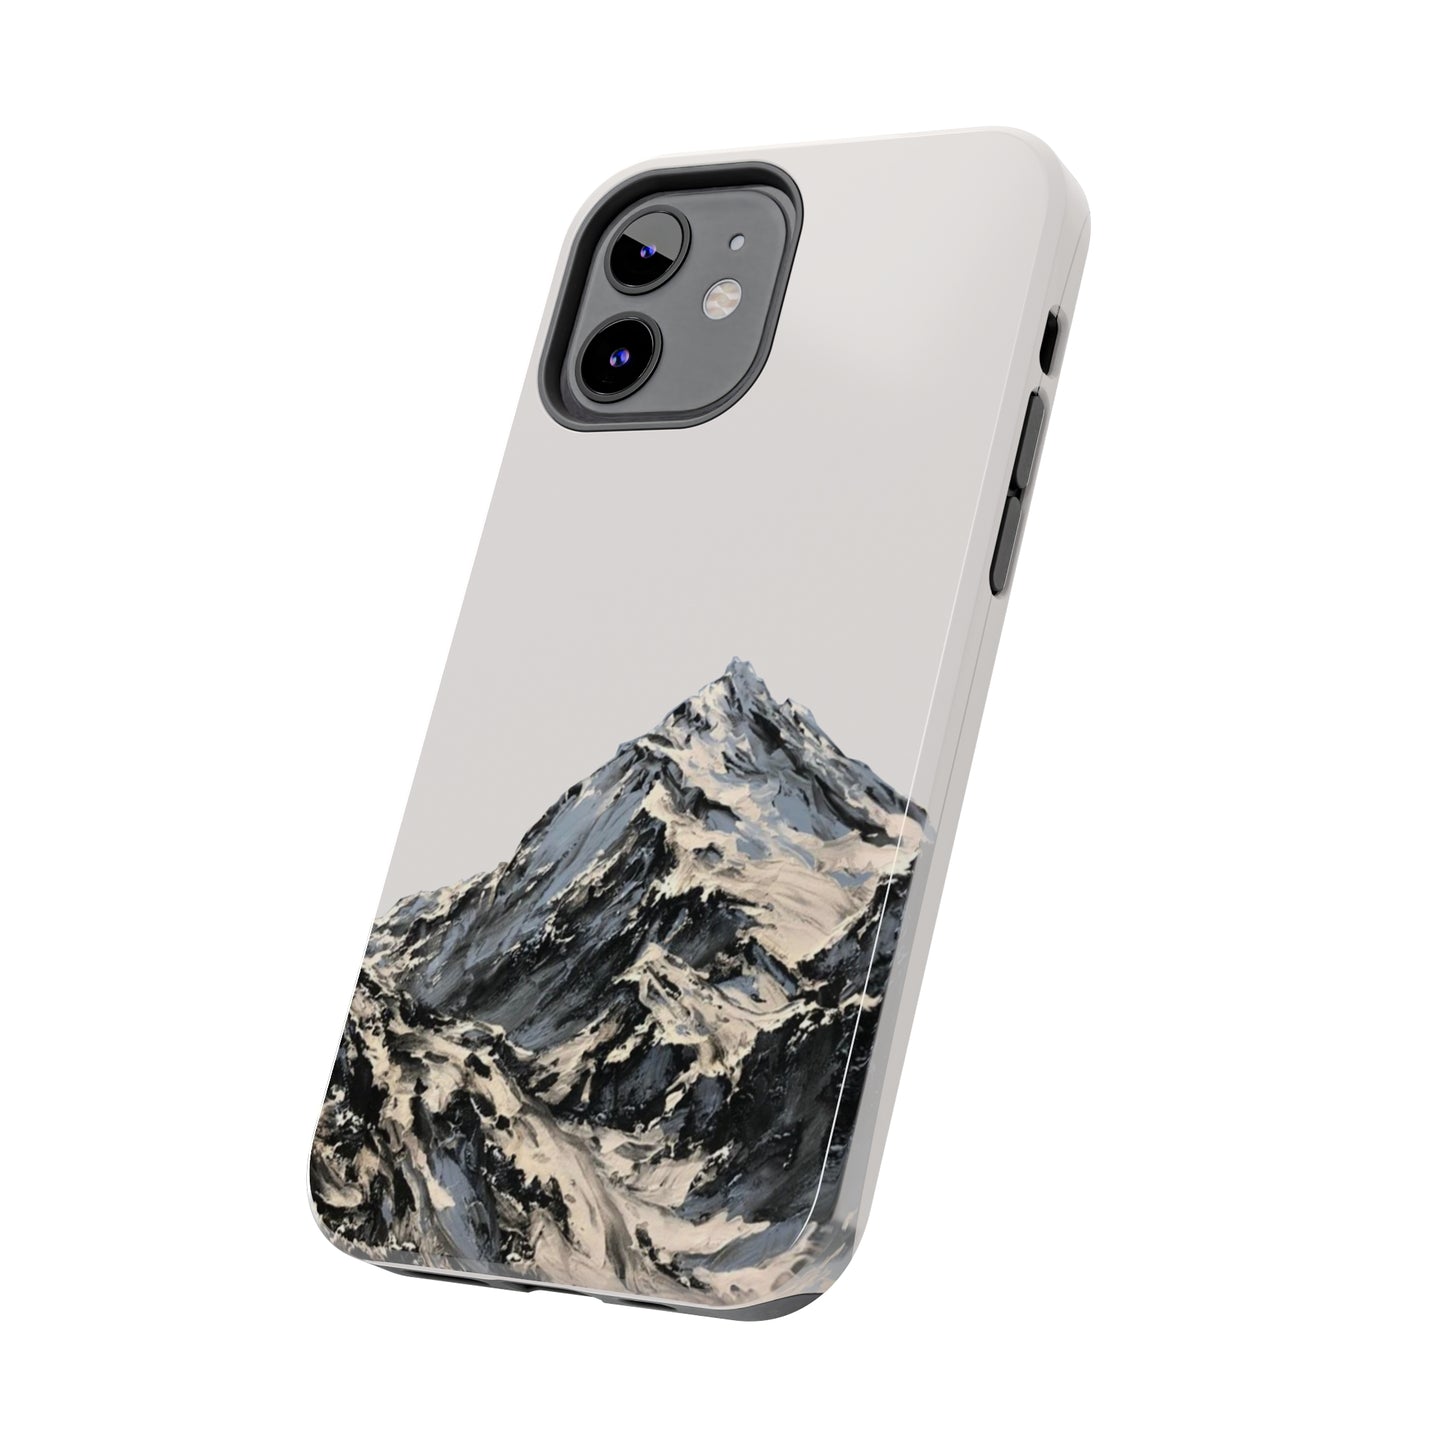 Snowy Mountain iPhone Cases